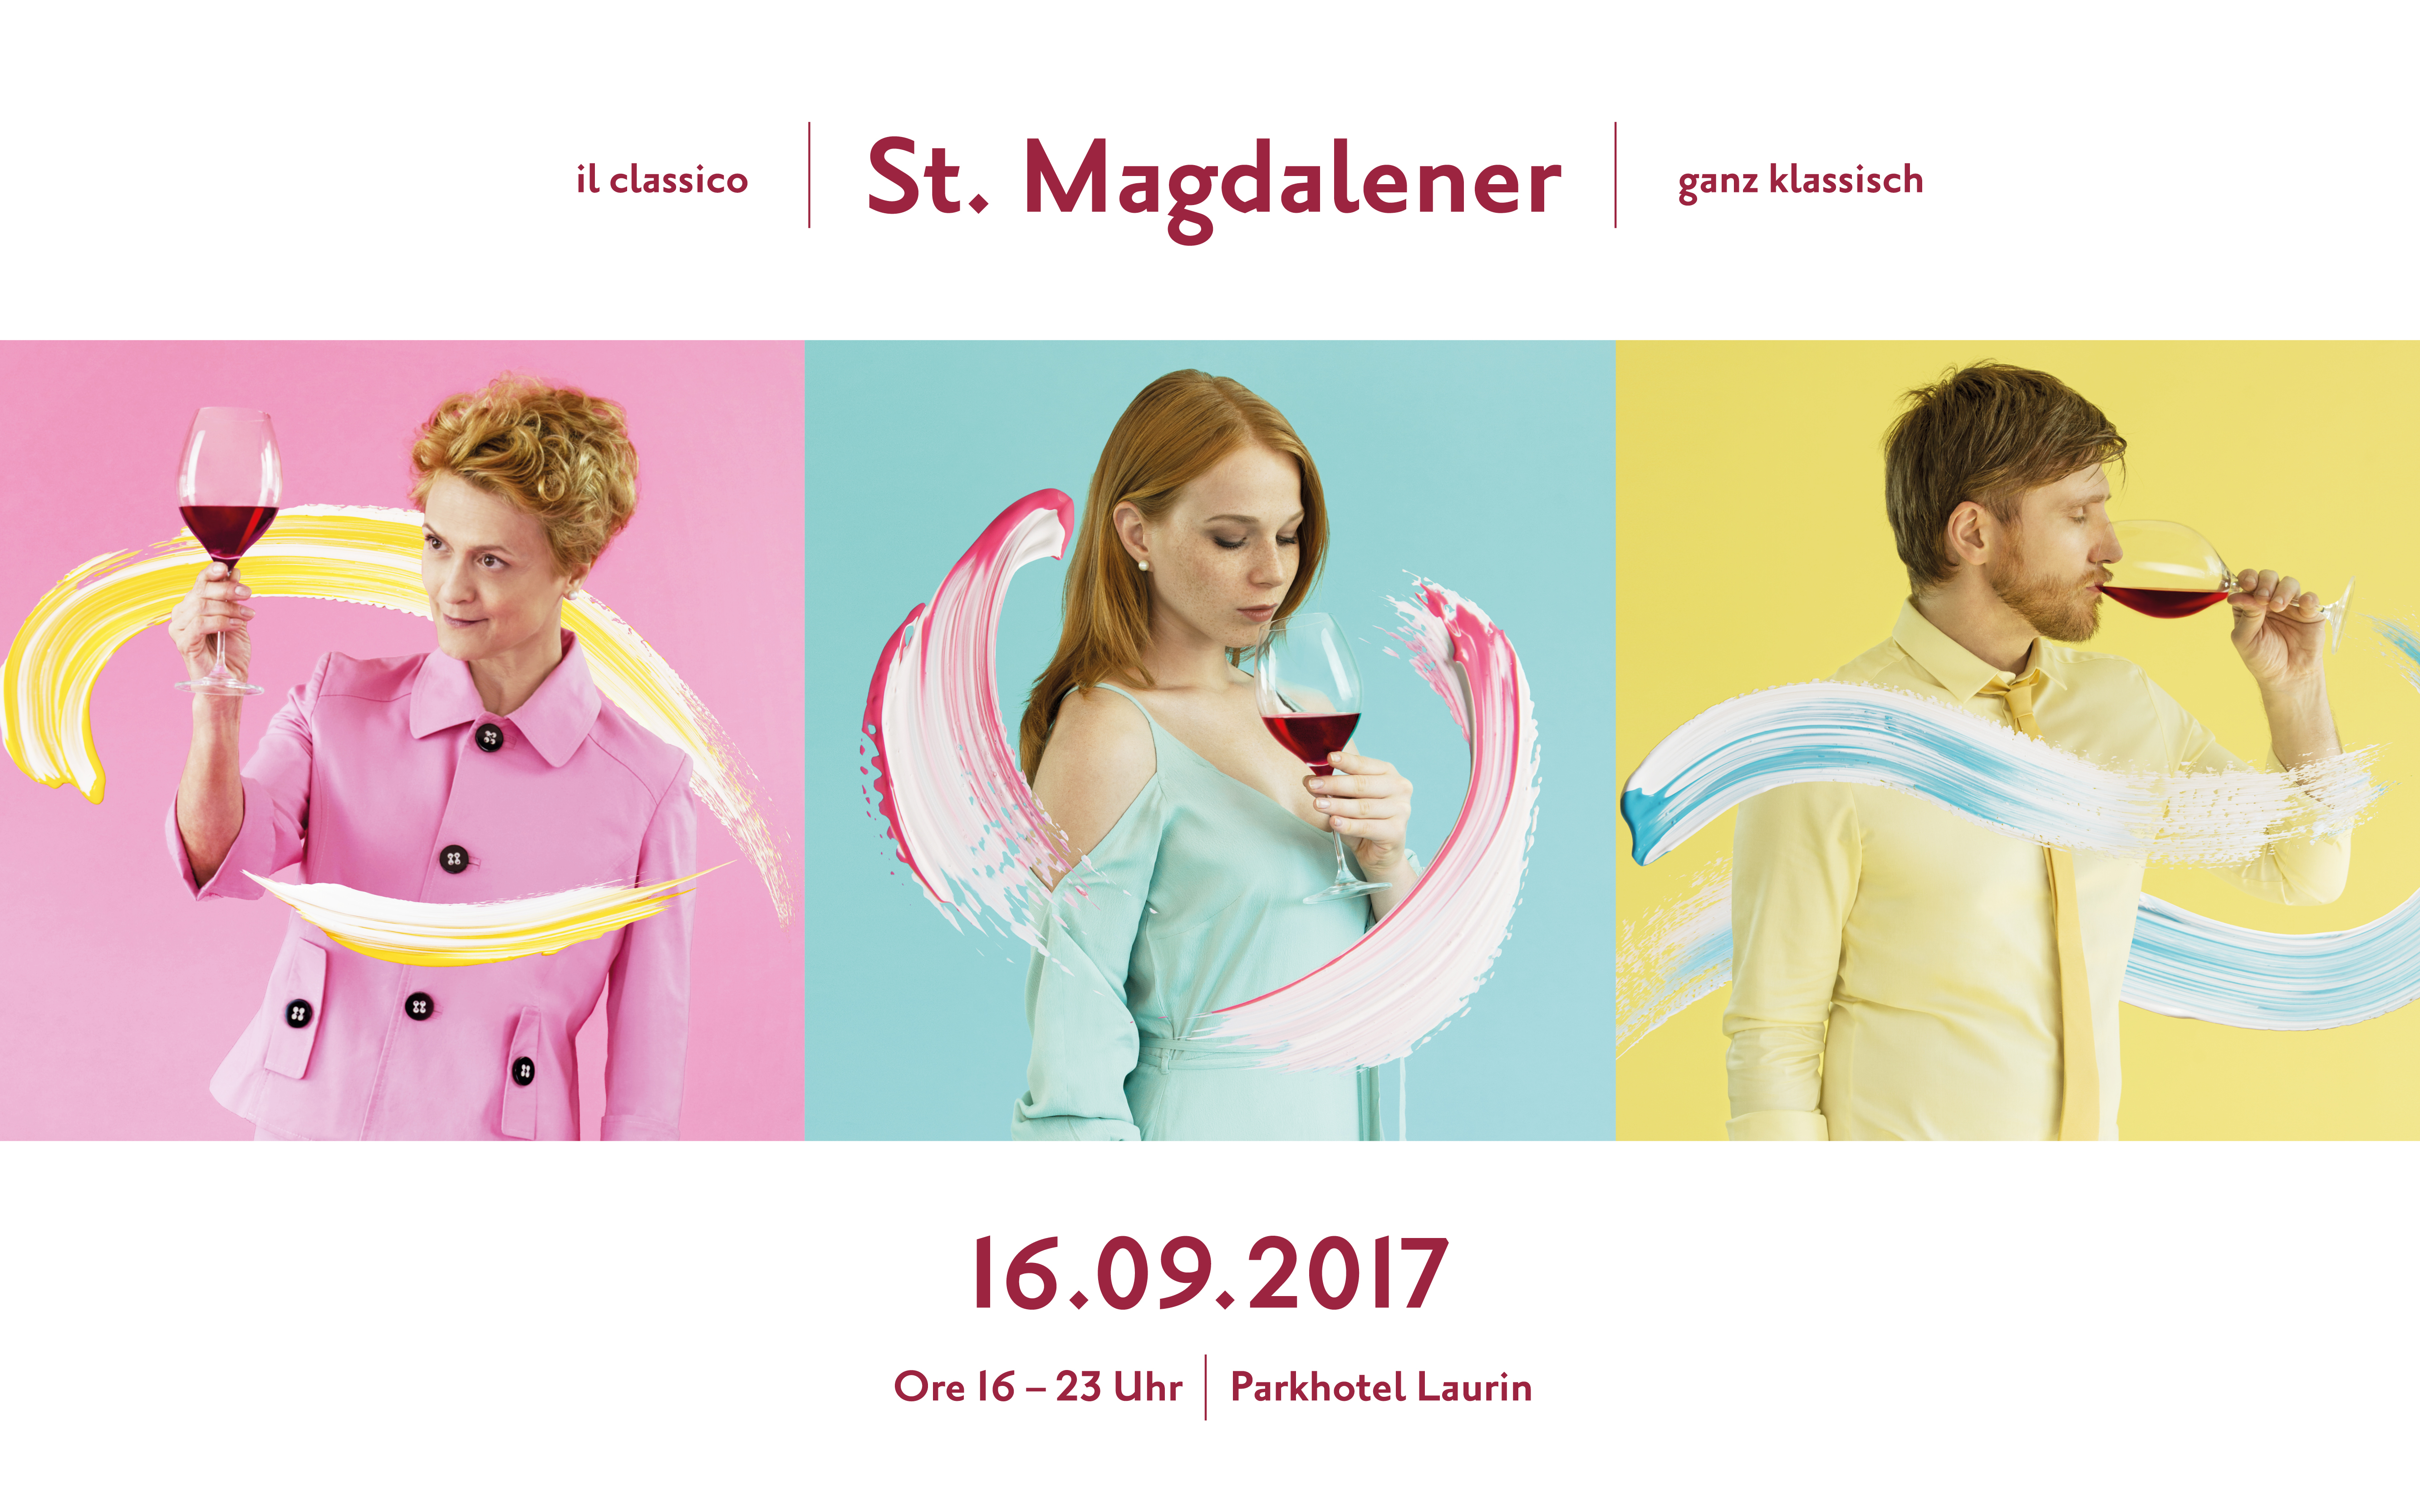 Event: The classic St. Magdalener wine